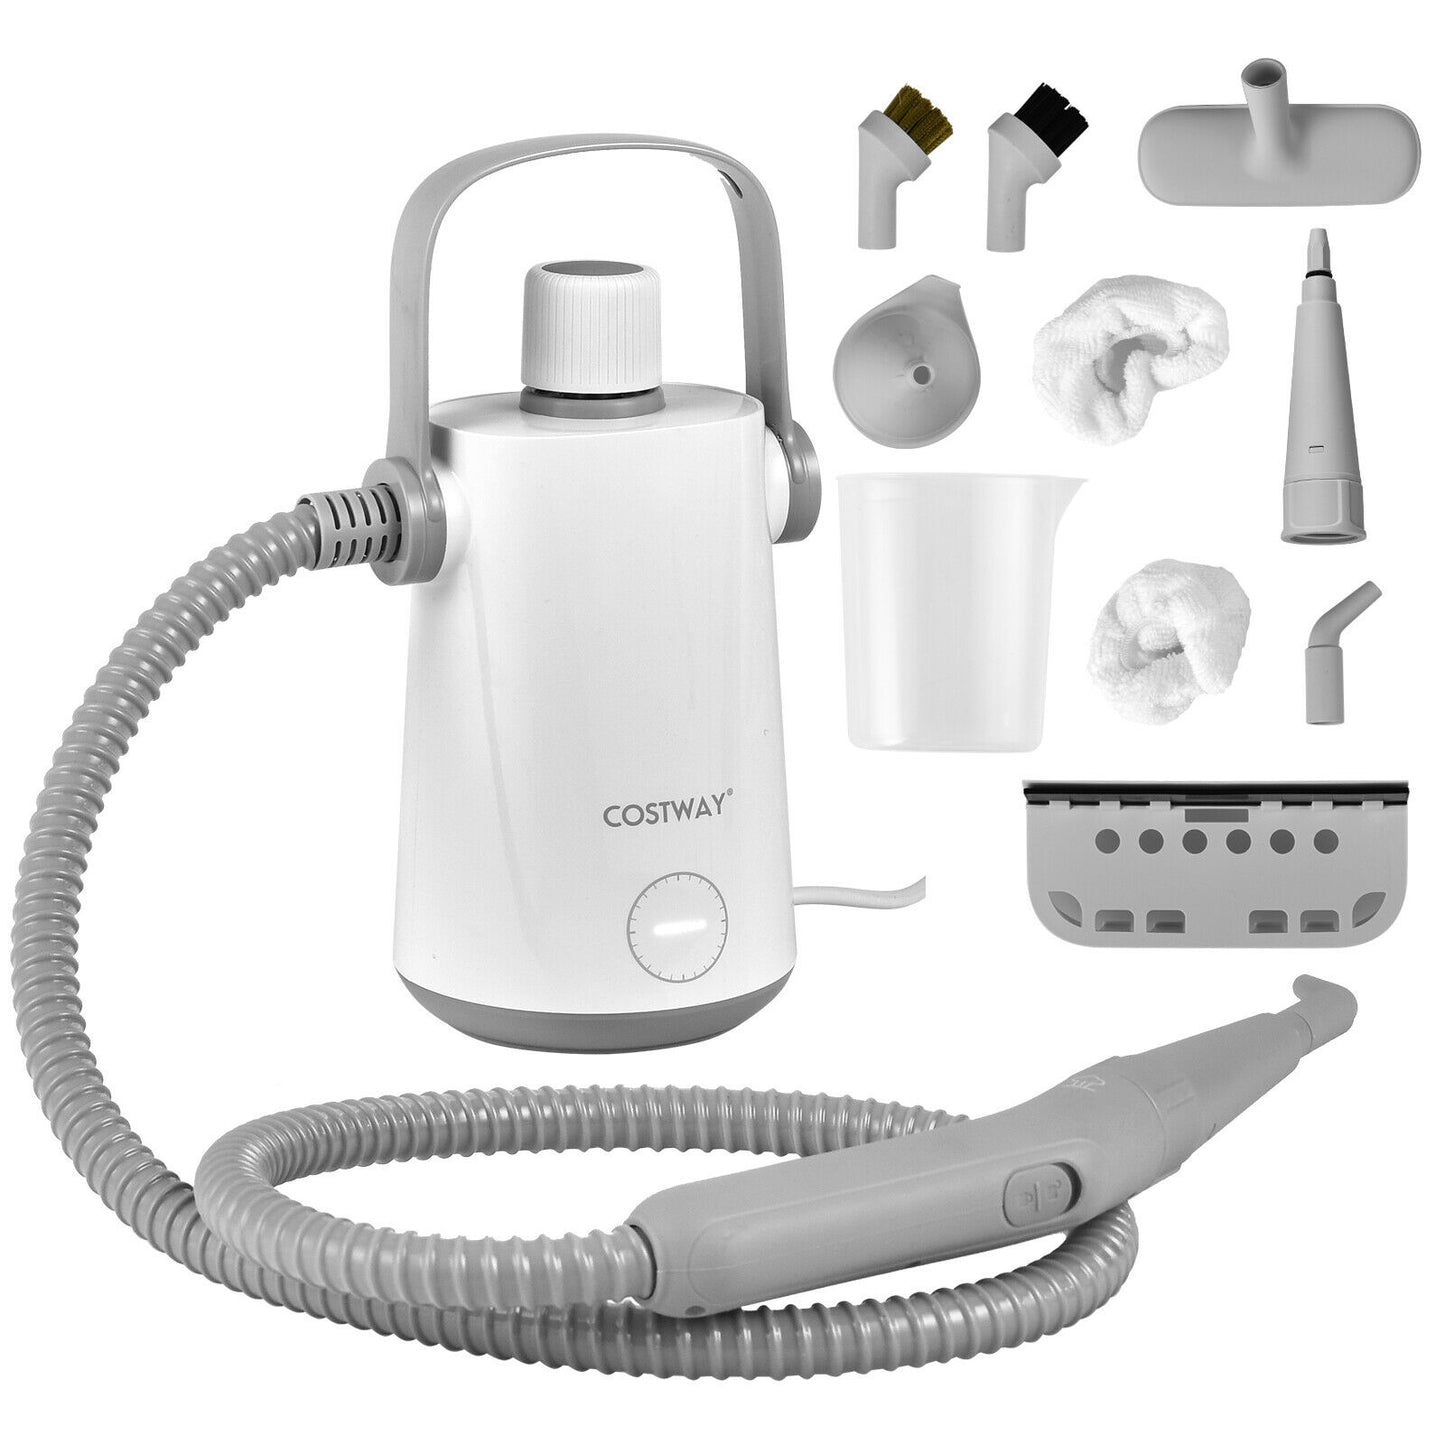 1000W Multifunction Portable Hand-held Steam Cleaner with 10 Accessories-Gray